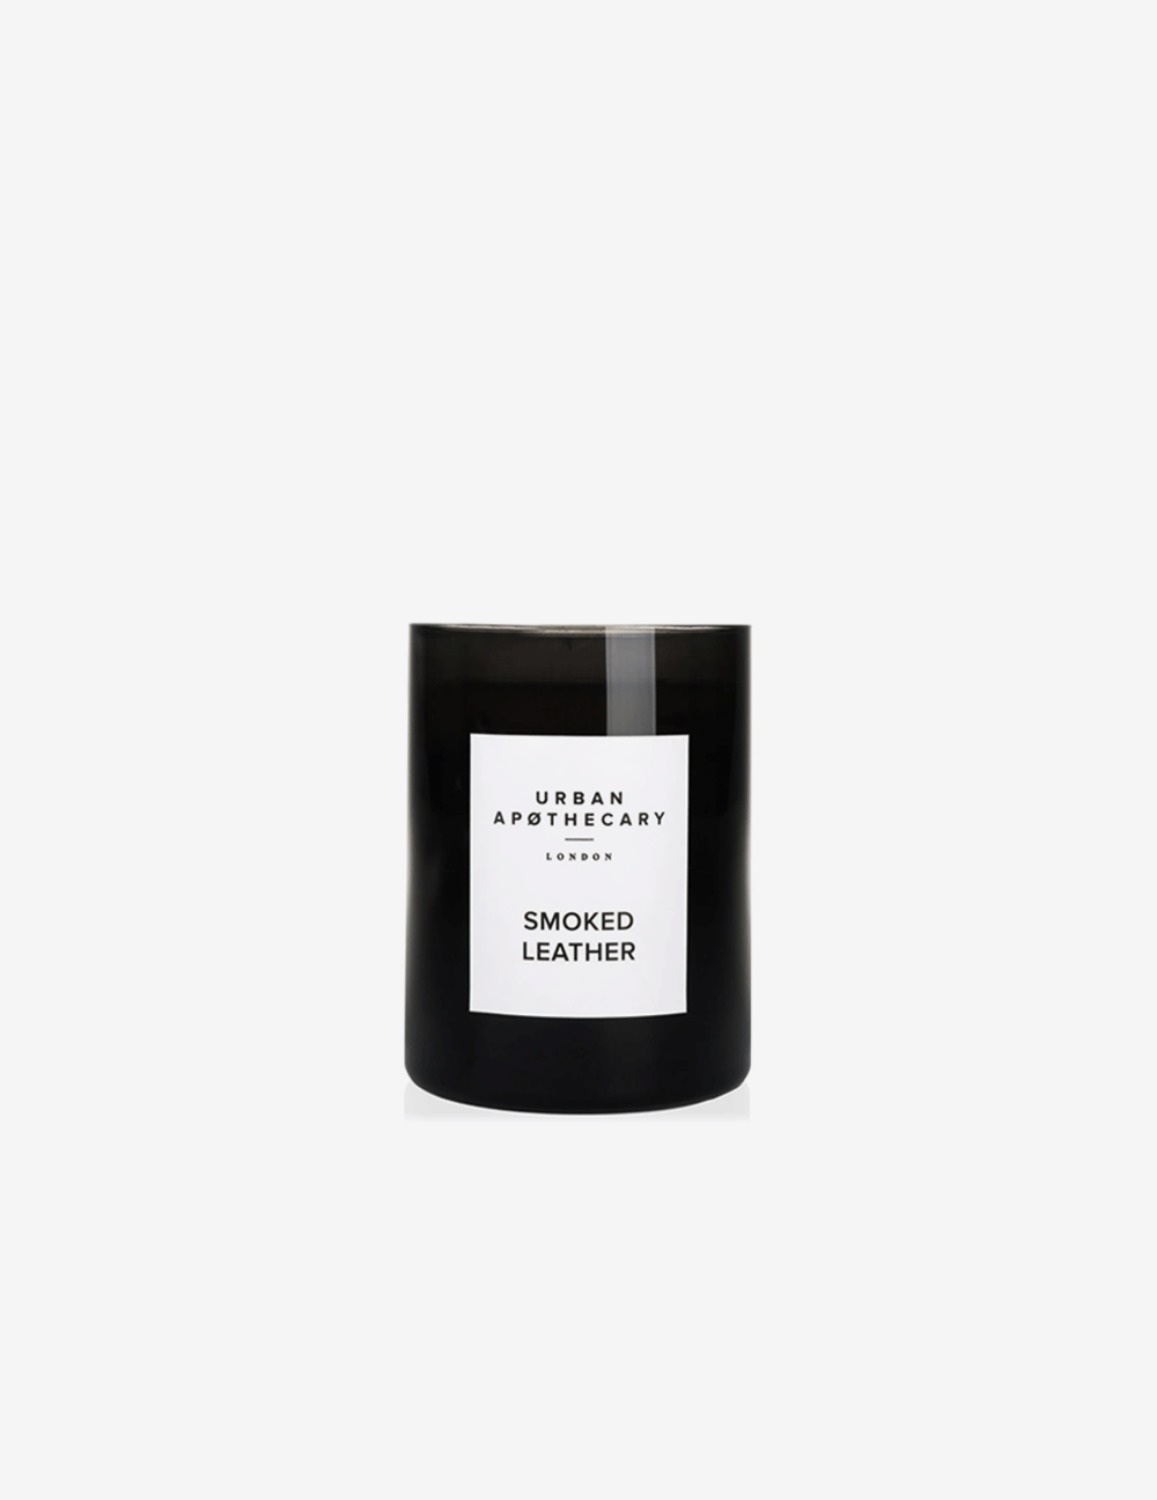 [Urban Apothecary] Smoked Leather / Luxury Candle